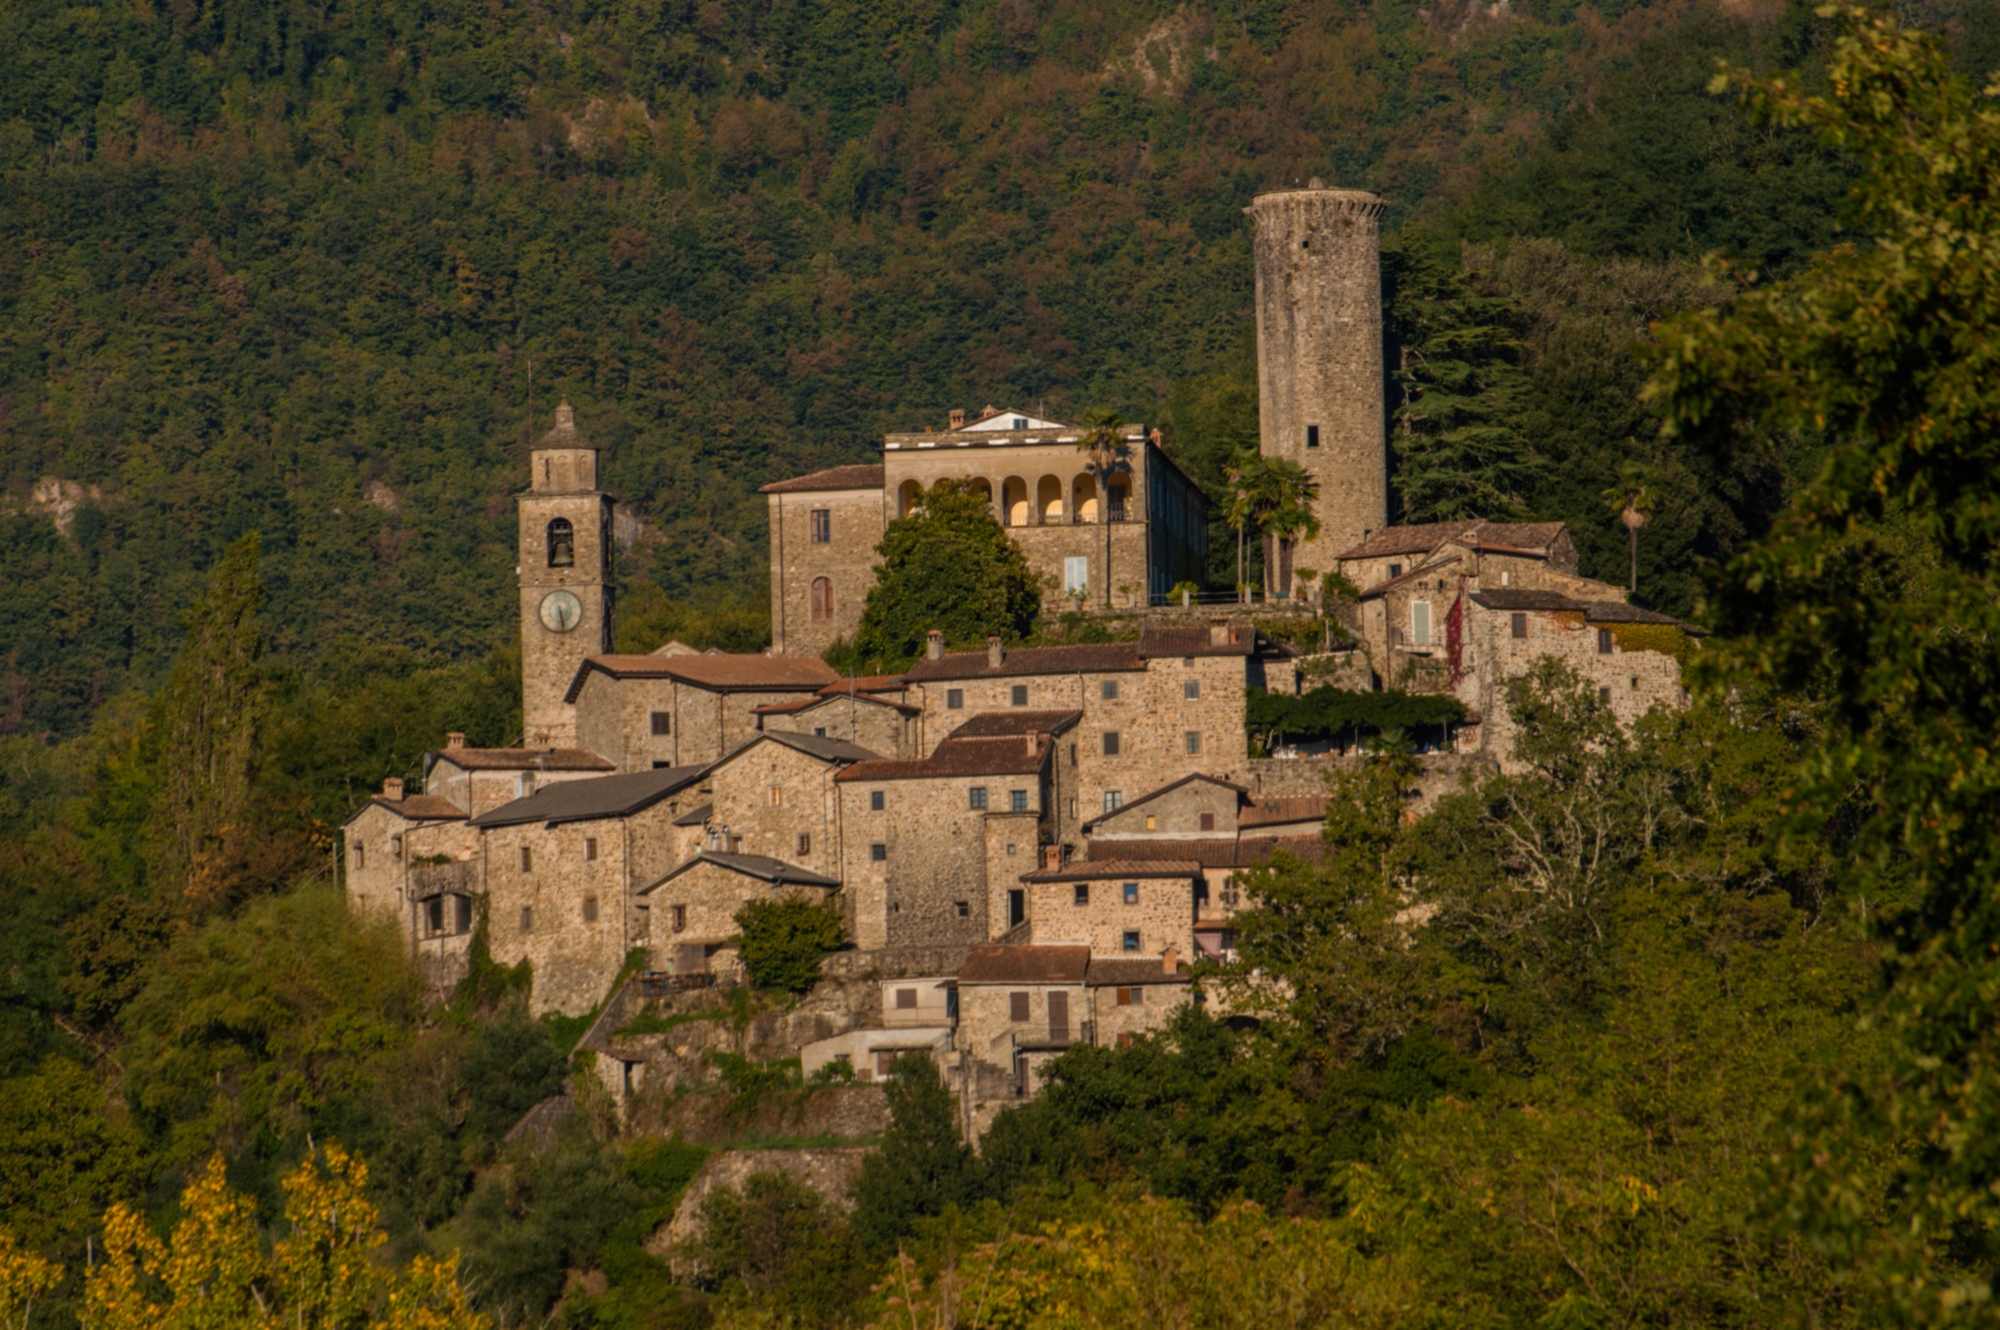 Bagnone and the castle